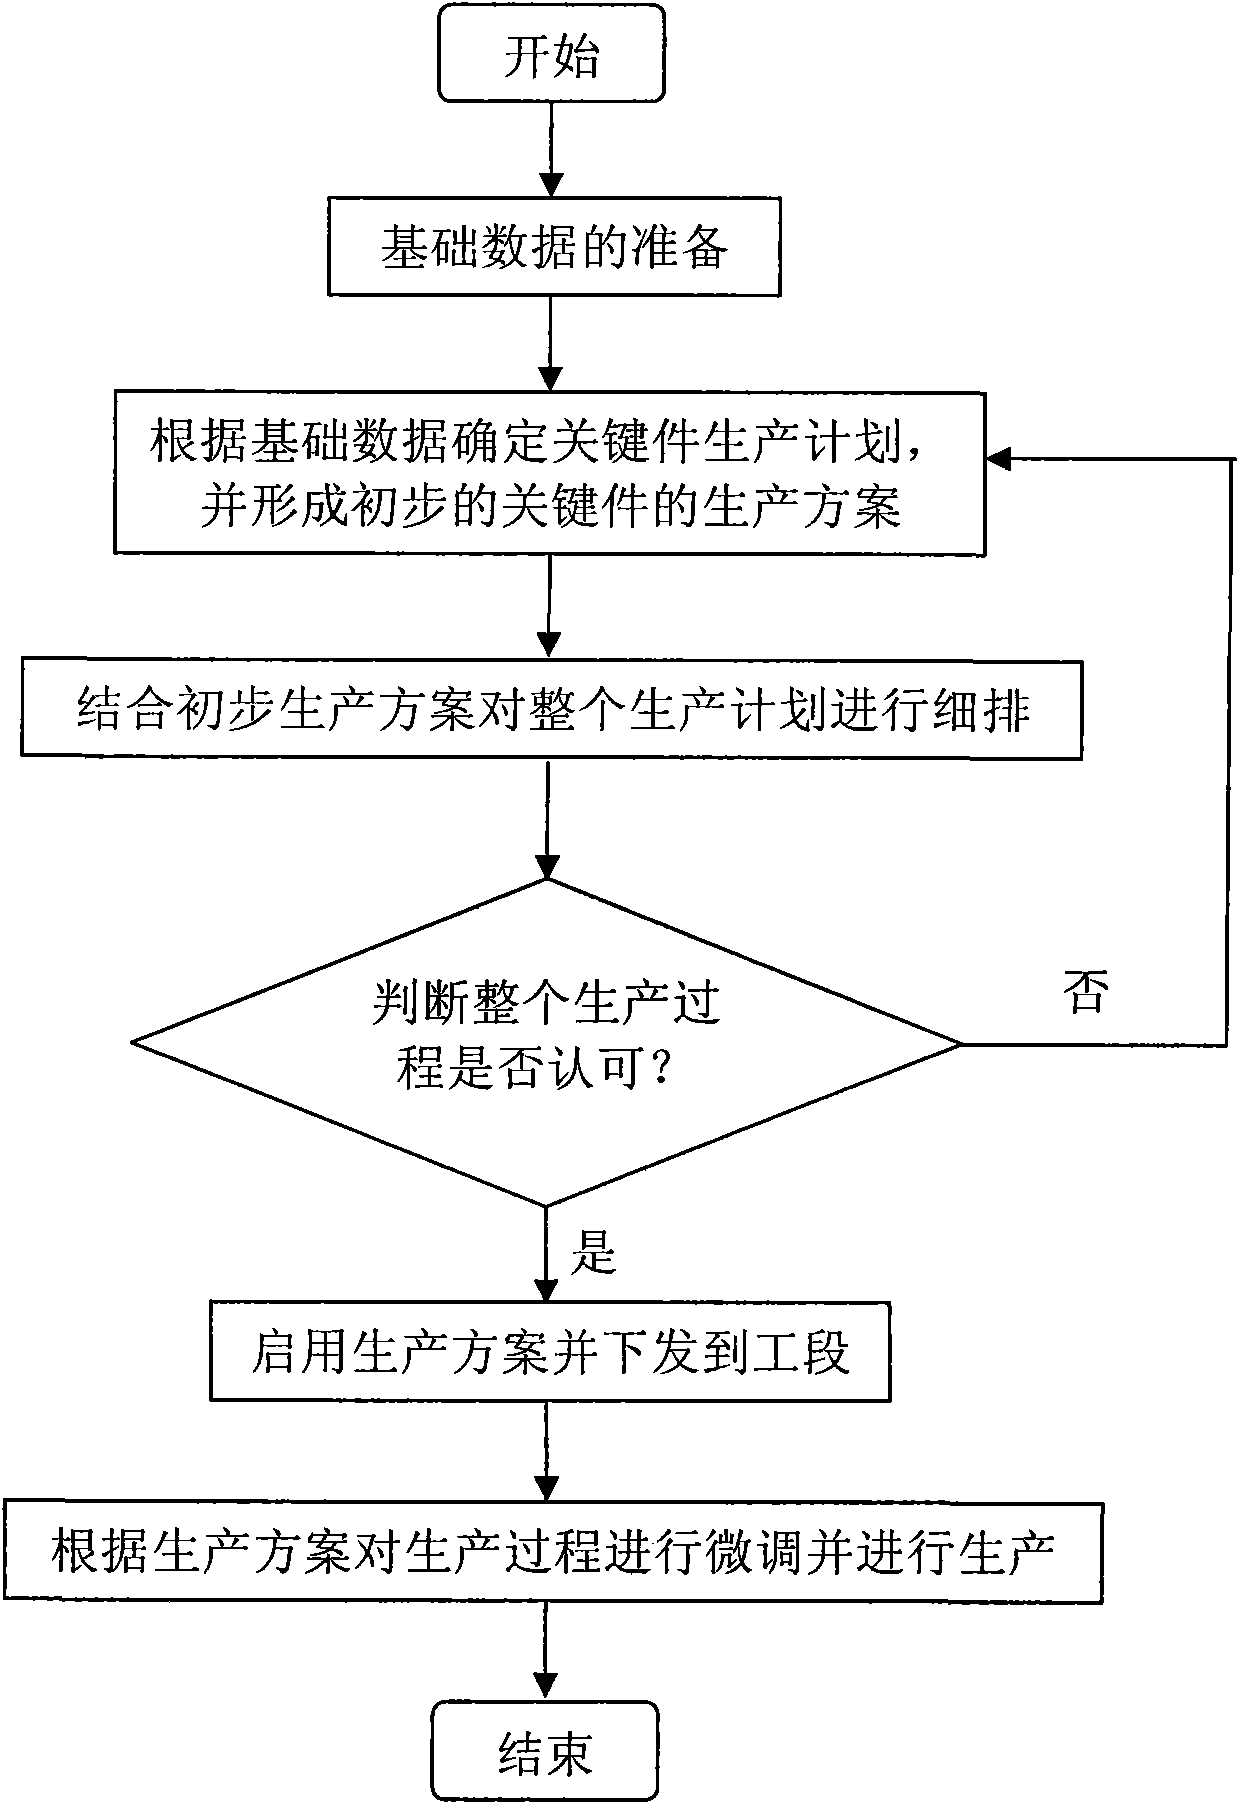 Production plan method based on limited capacity and simulation system